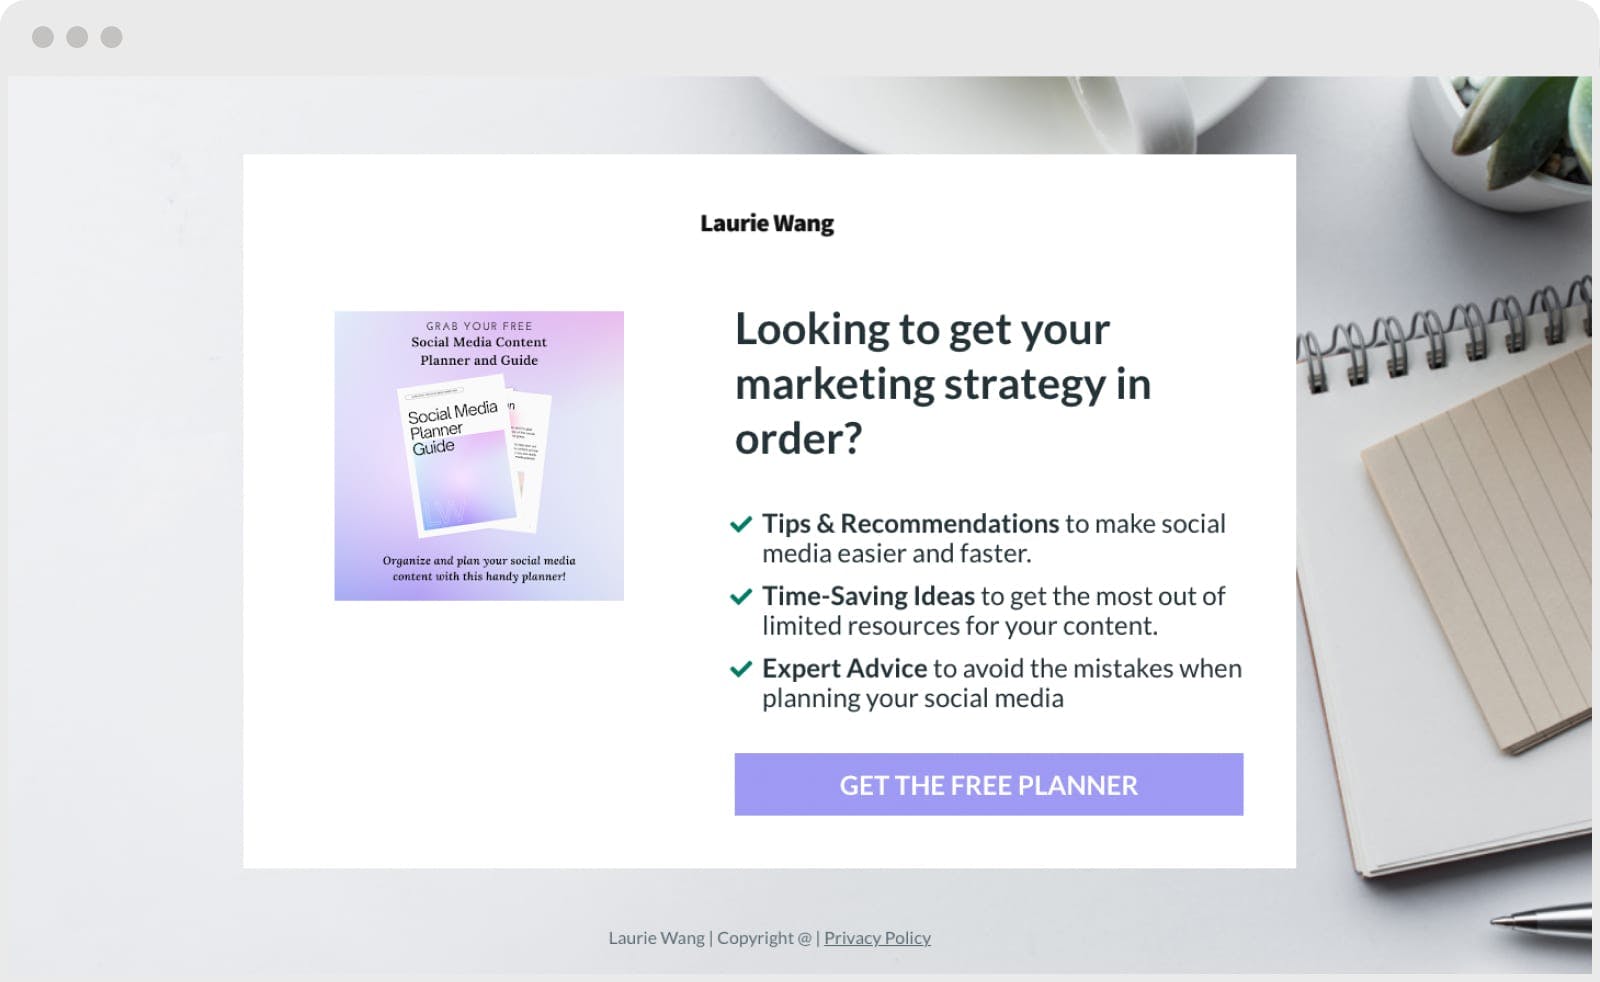 free planner lead magnet landing page example created by Laurie Wang